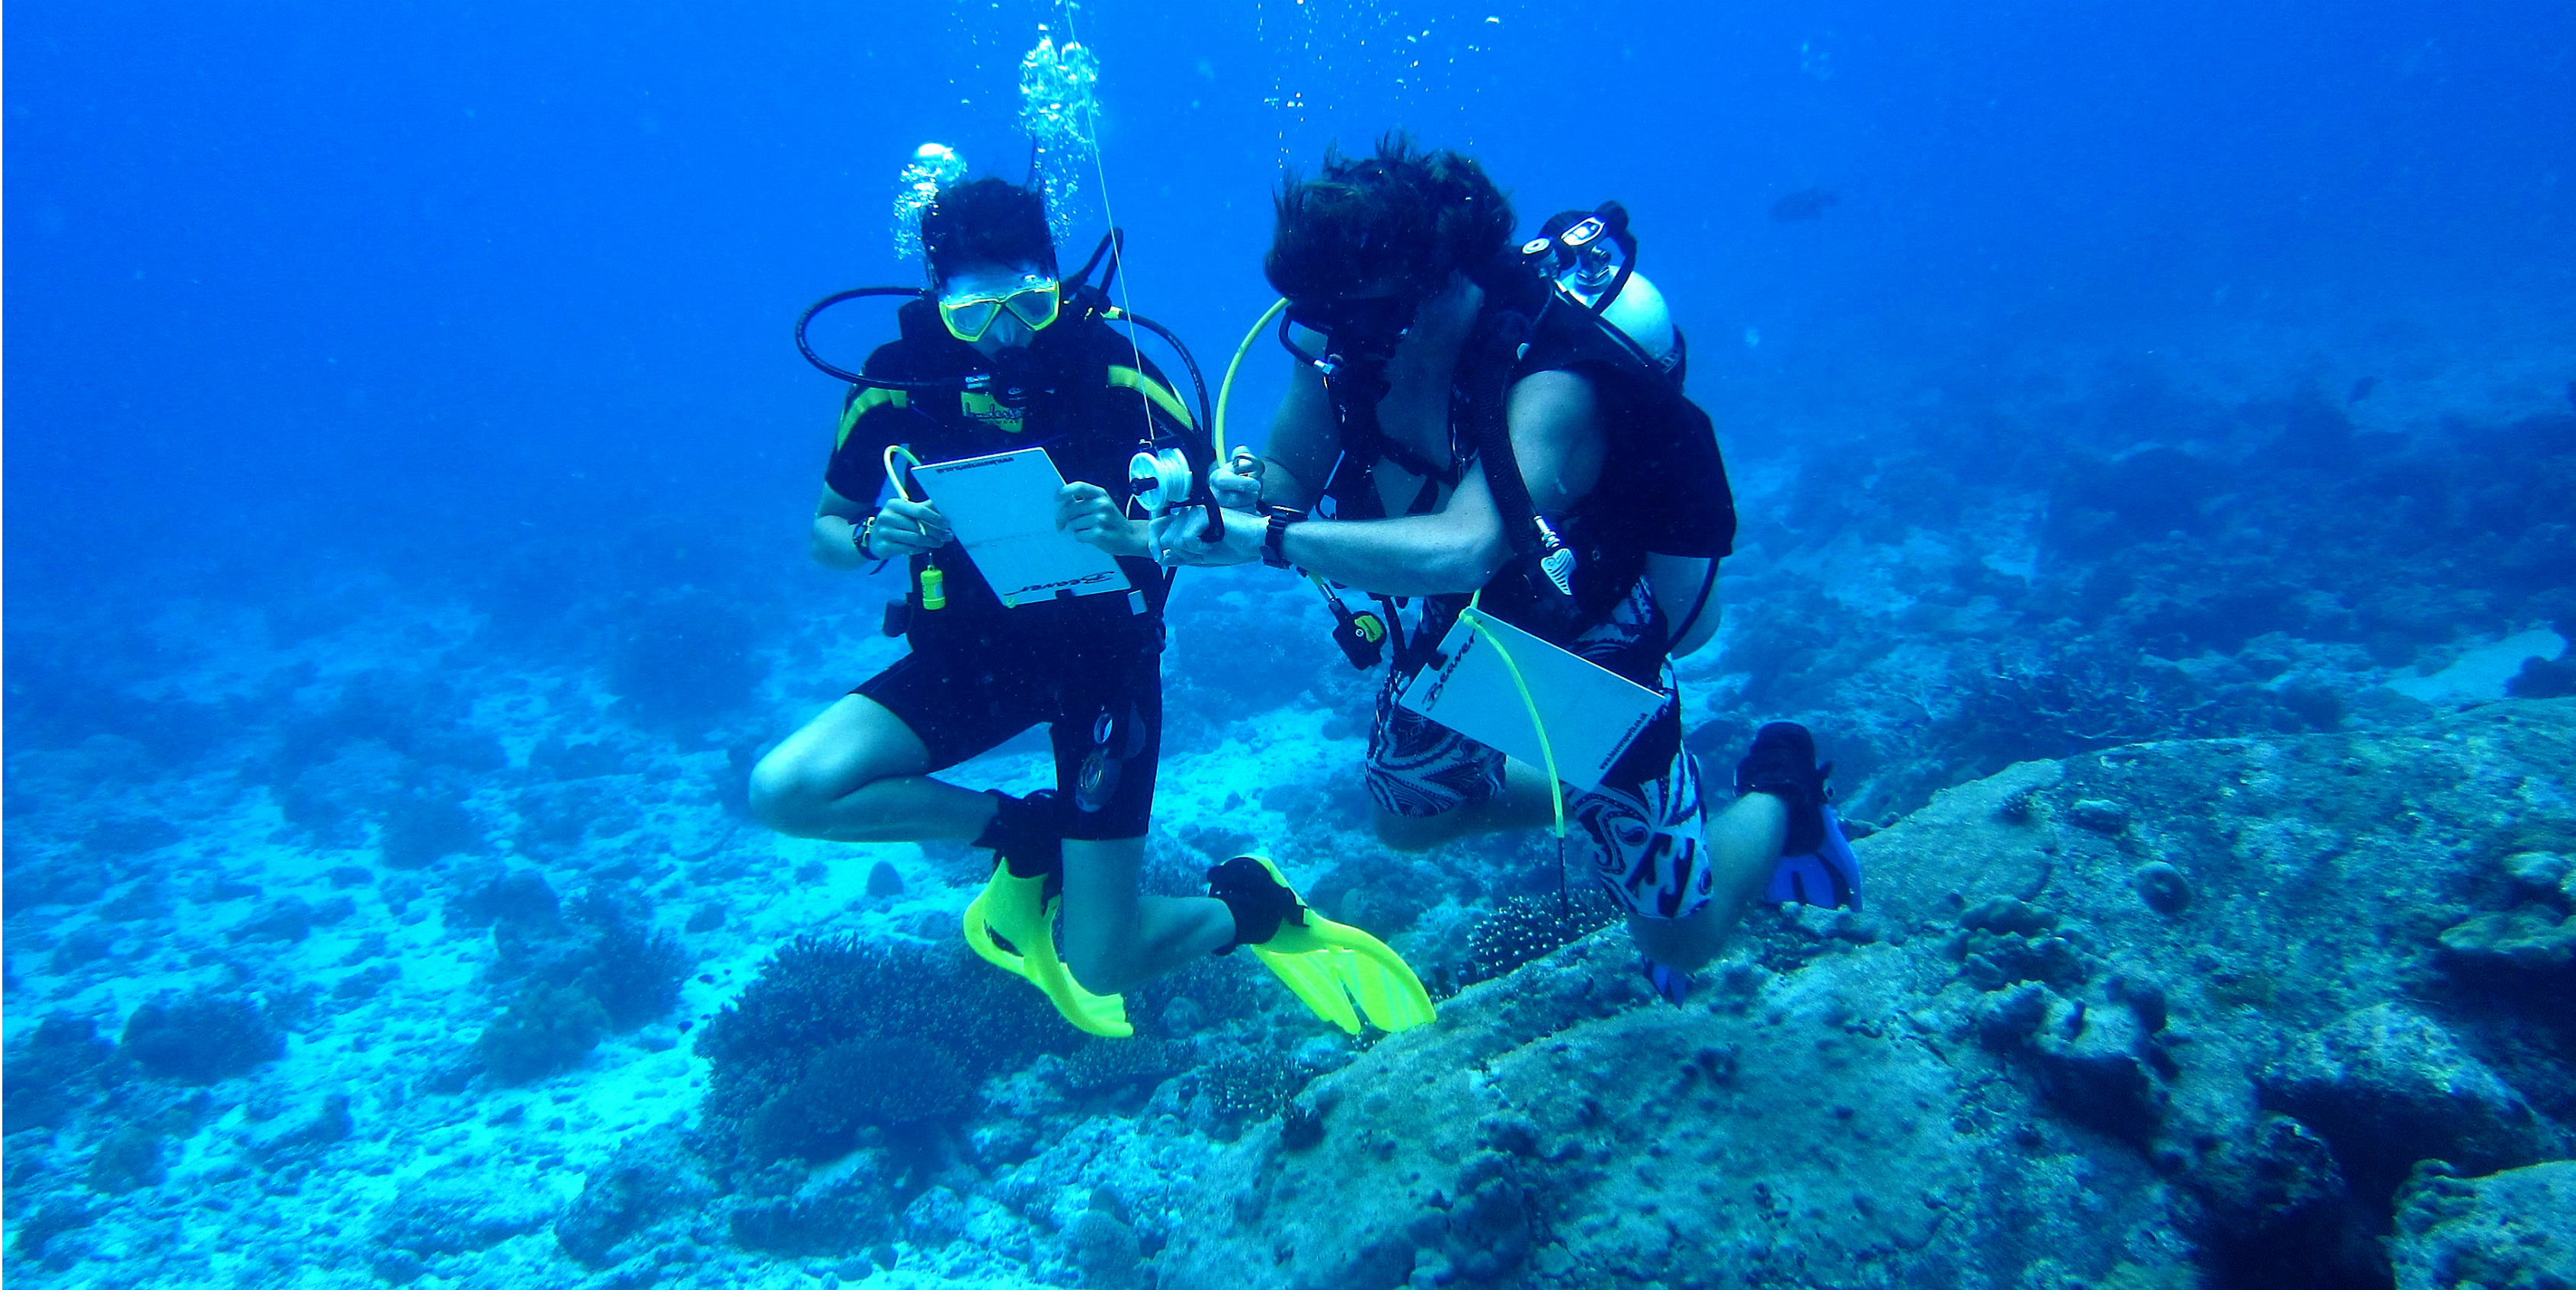 Marine conservationists in a dive check